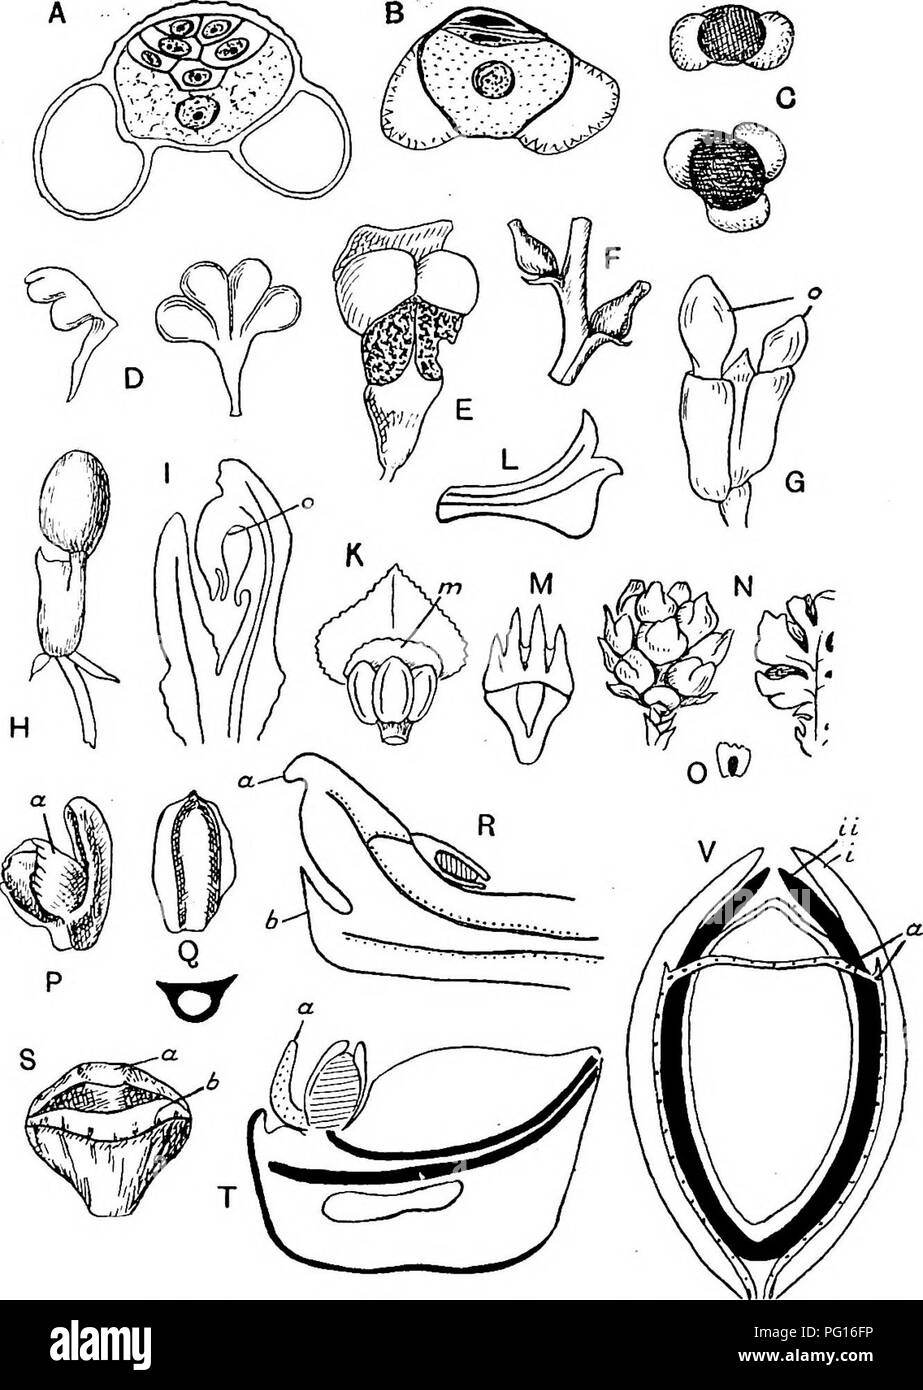 . Fossil plants : for students of botany and geology . Paleobotany. 116 CONIFBRALES (KECENT) [CH.. Fig. 684. A, B, C, microspores of Podocarpus Toiara (A), Pinus Laricio (B), Micro- cachrys tetragona (C). D, E, miorosporophylls of Torreya californica (D) and Abies alba (E). Megasporophylls etc. of Podocarpus spicala (F); P. Totara (G), o, ovule ; P. neriifolia (H); P. imbricafa (I), o, ovule; Cunninglmmia sinensis (K), m, membrane; Gryptomeria (L, M). N, 0, megastrobilus and seed of Athroiaxis laxifoUa. P, megasporophyll and seed of Dacrydium Balansae; a, epimatium. Q, seed of Gupressus semper Stock Photo